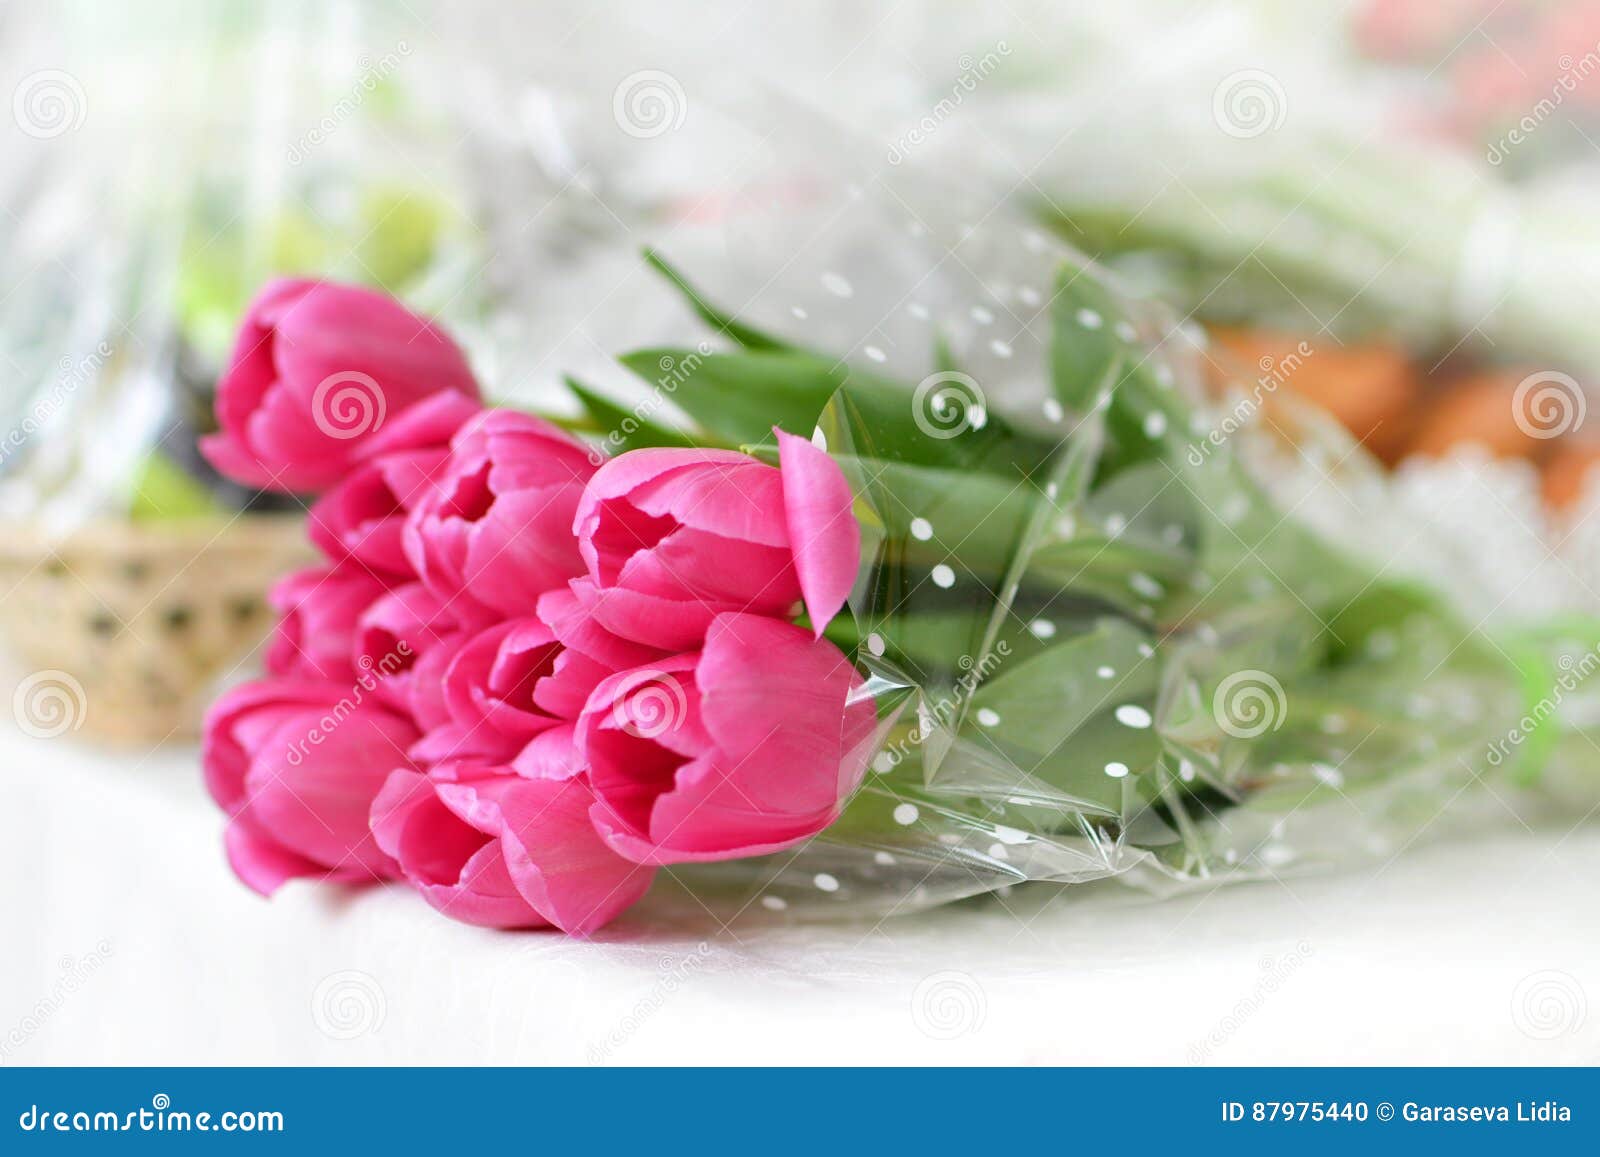 Bouquet of pink tulips stock photo. Image of spring, bright - 87975440